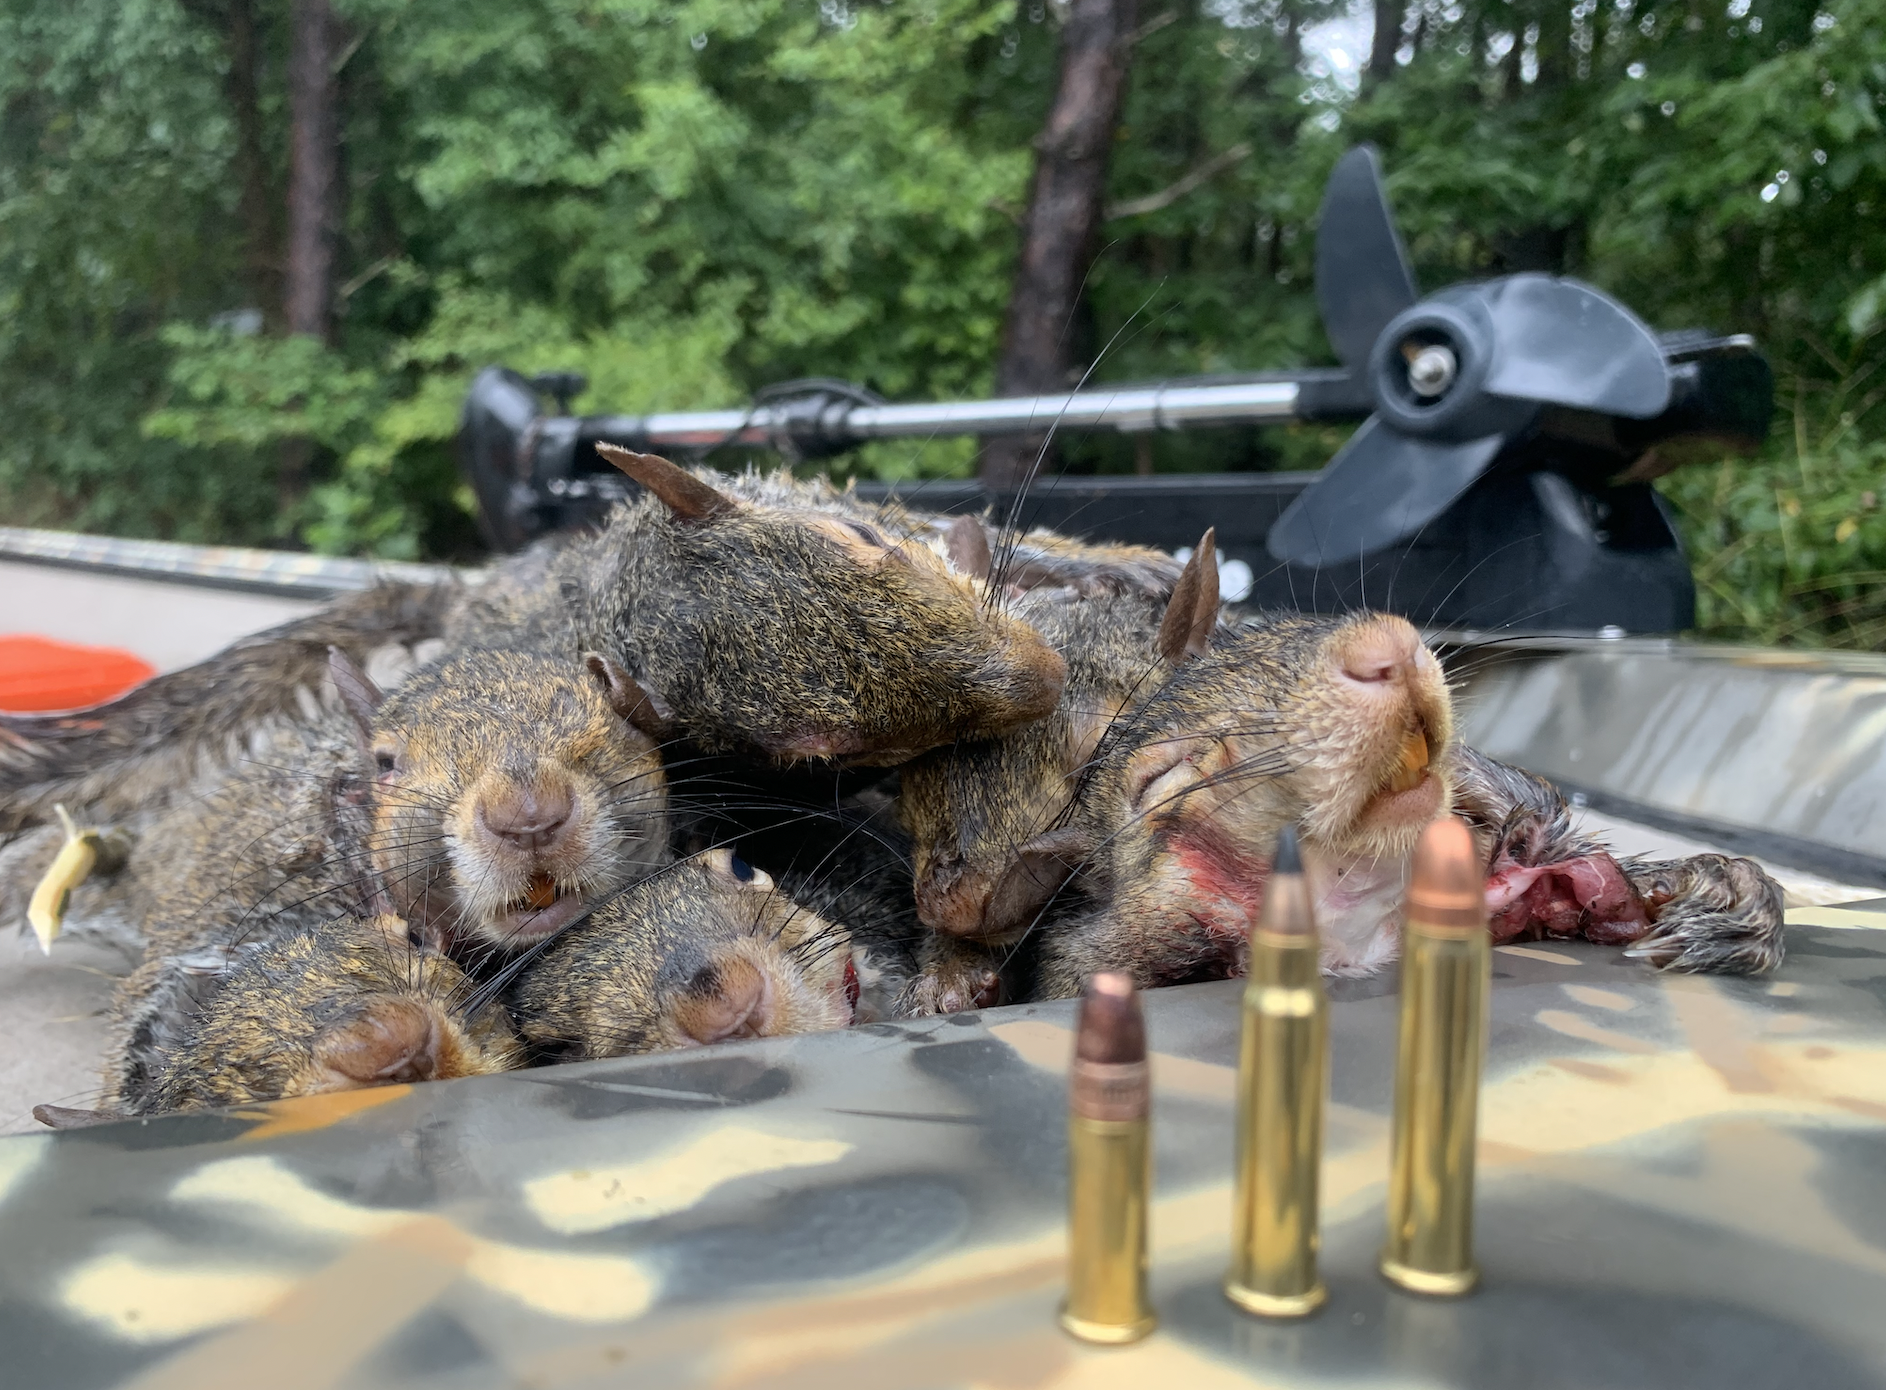 Picking a rimfire or shotgun load depends on how you hunt.